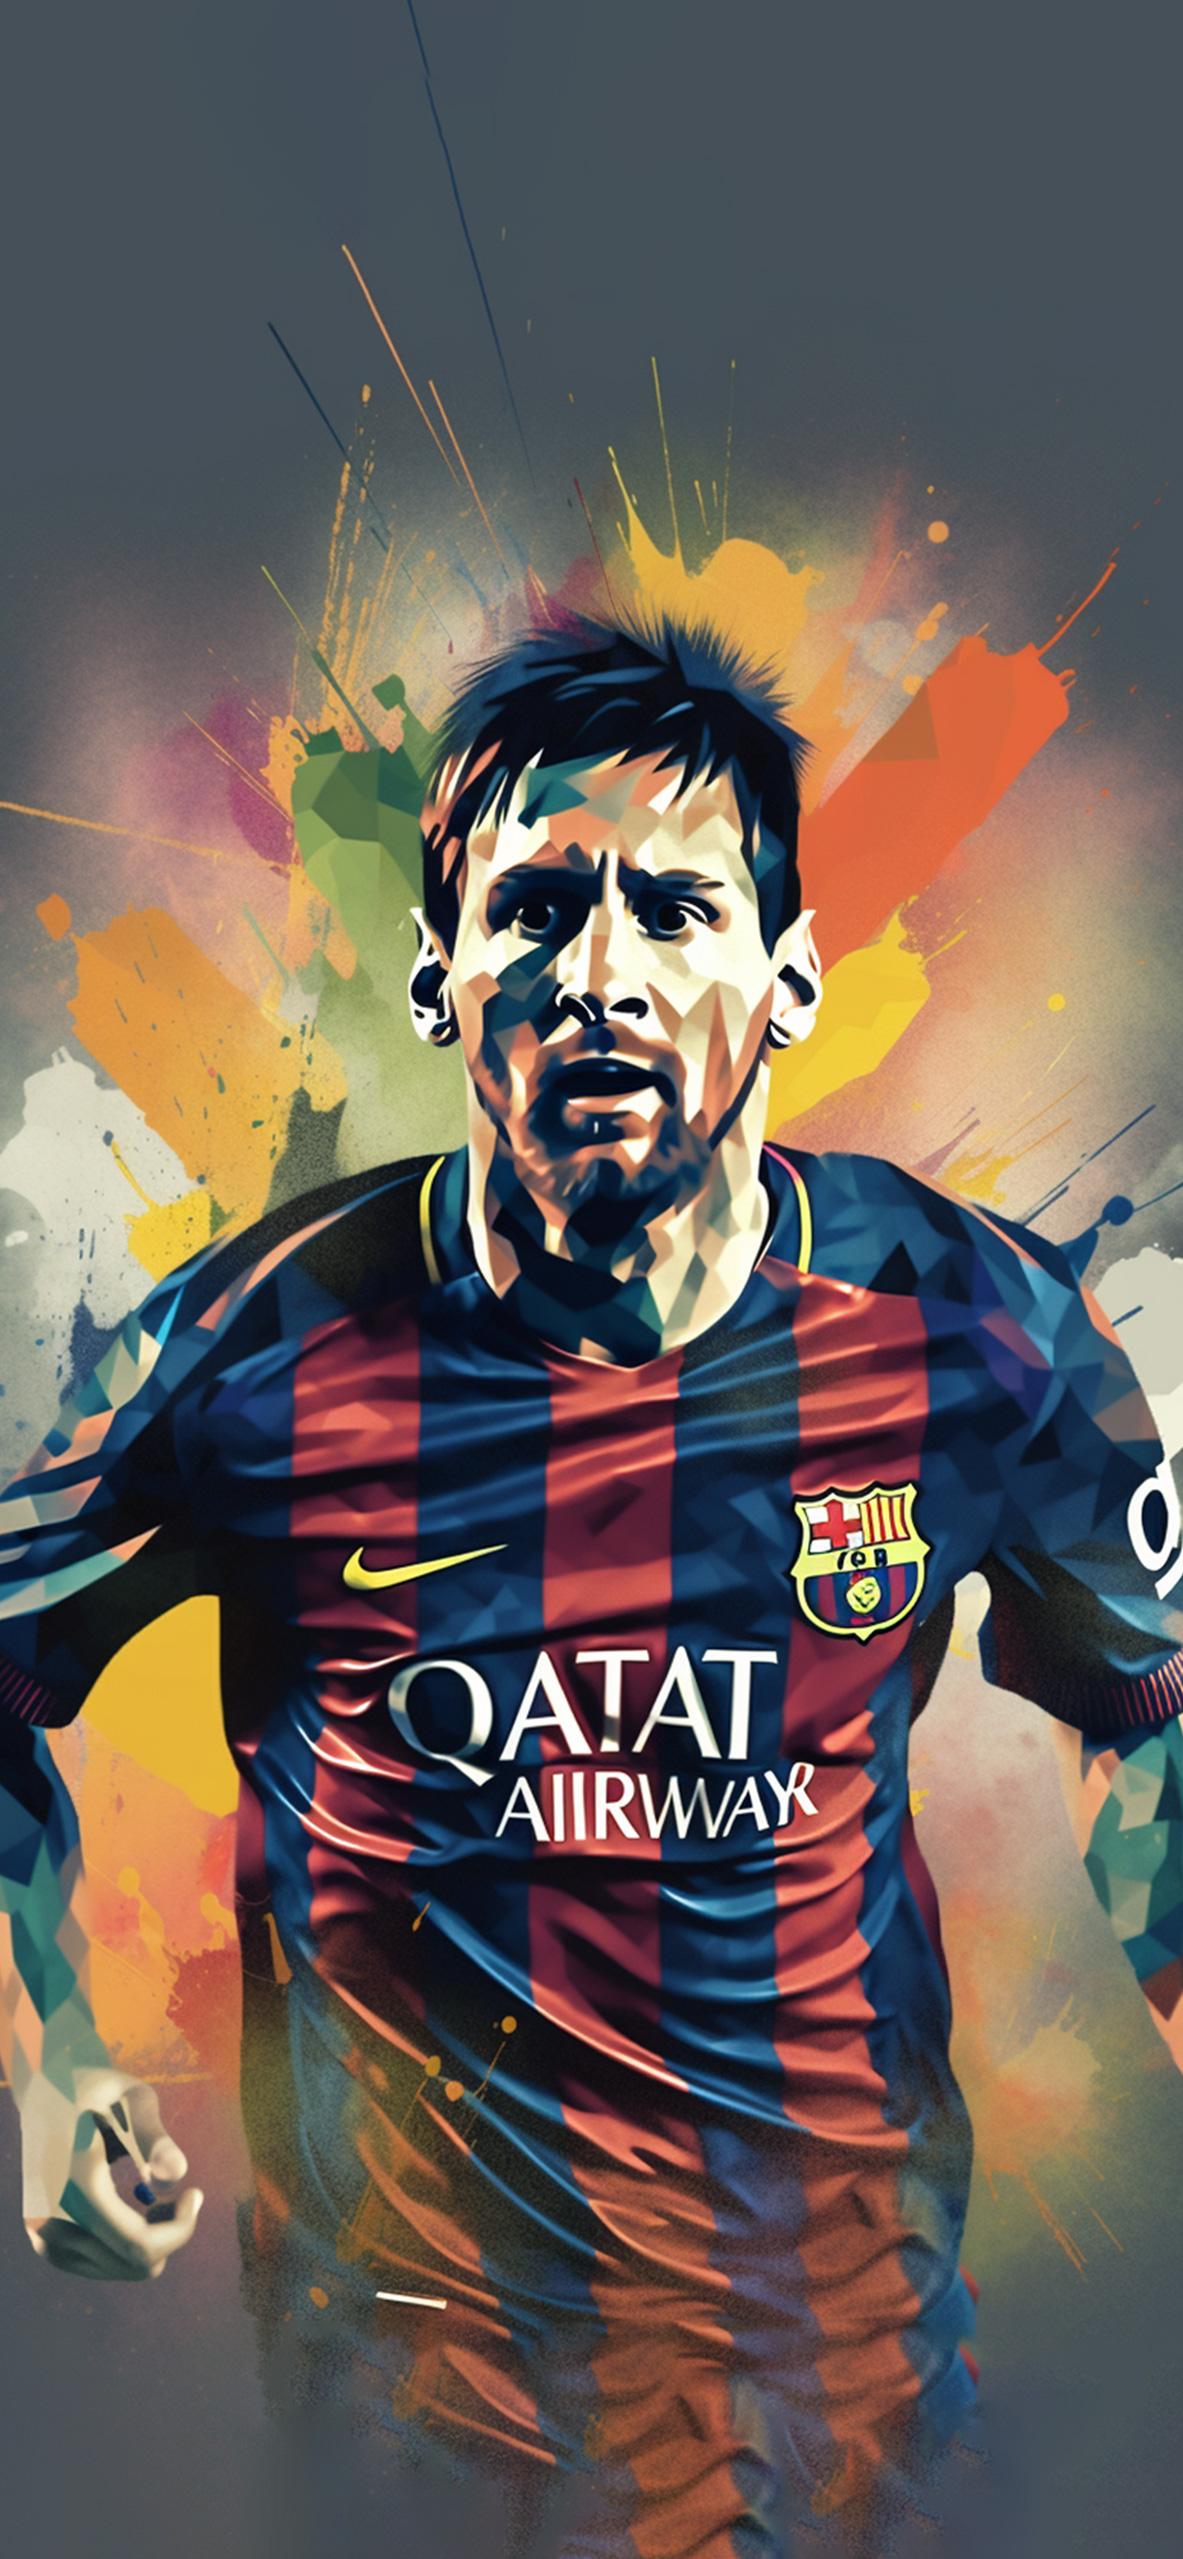 Lionel Messi Art Wallpapers   Cool Leo Messi Wallpaper for iPhone